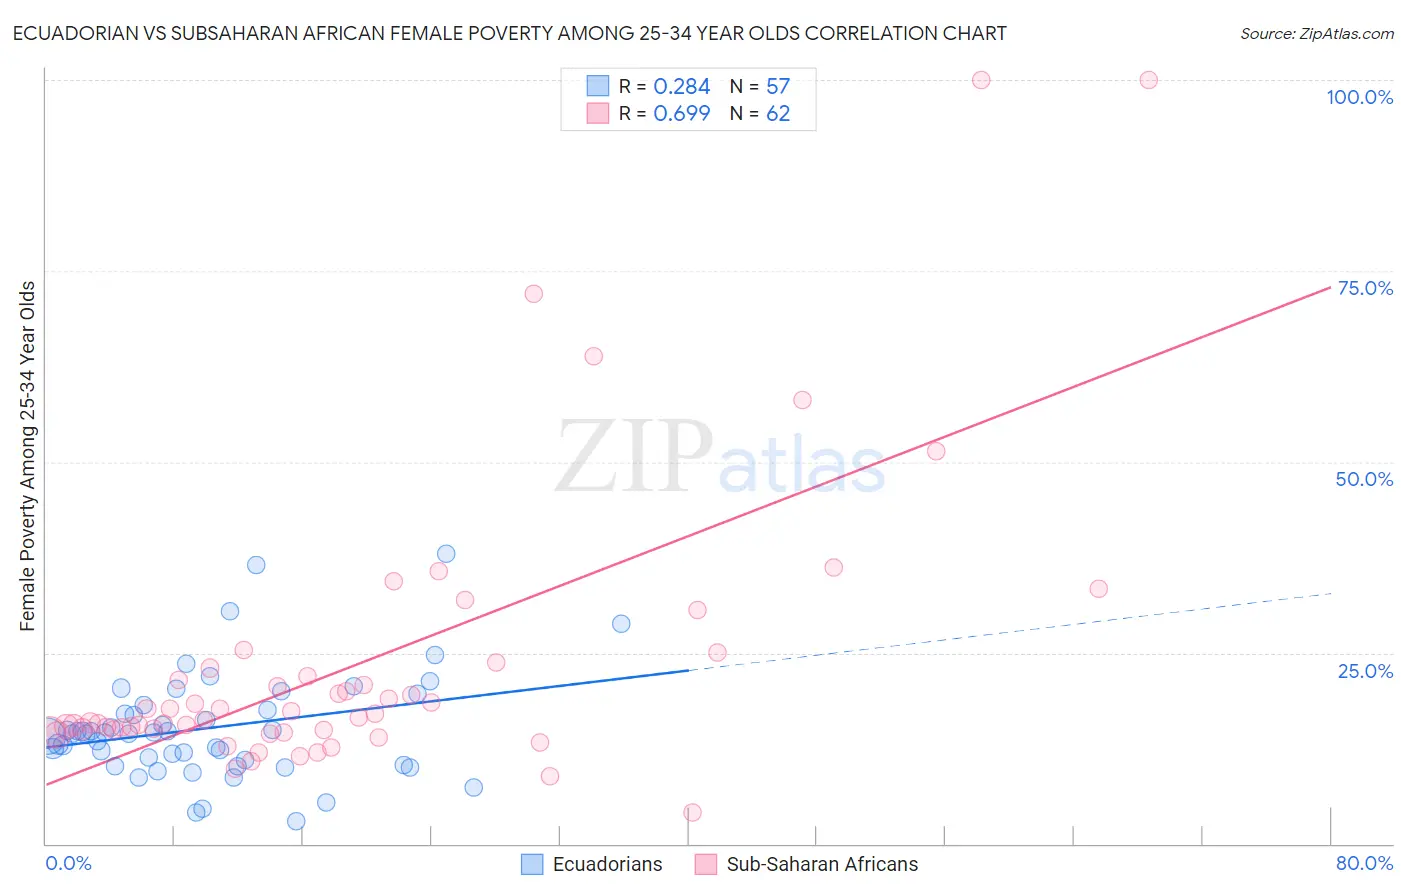 Ecuadorian vs Subsaharan African Female Poverty Among 25-34 Year Olds